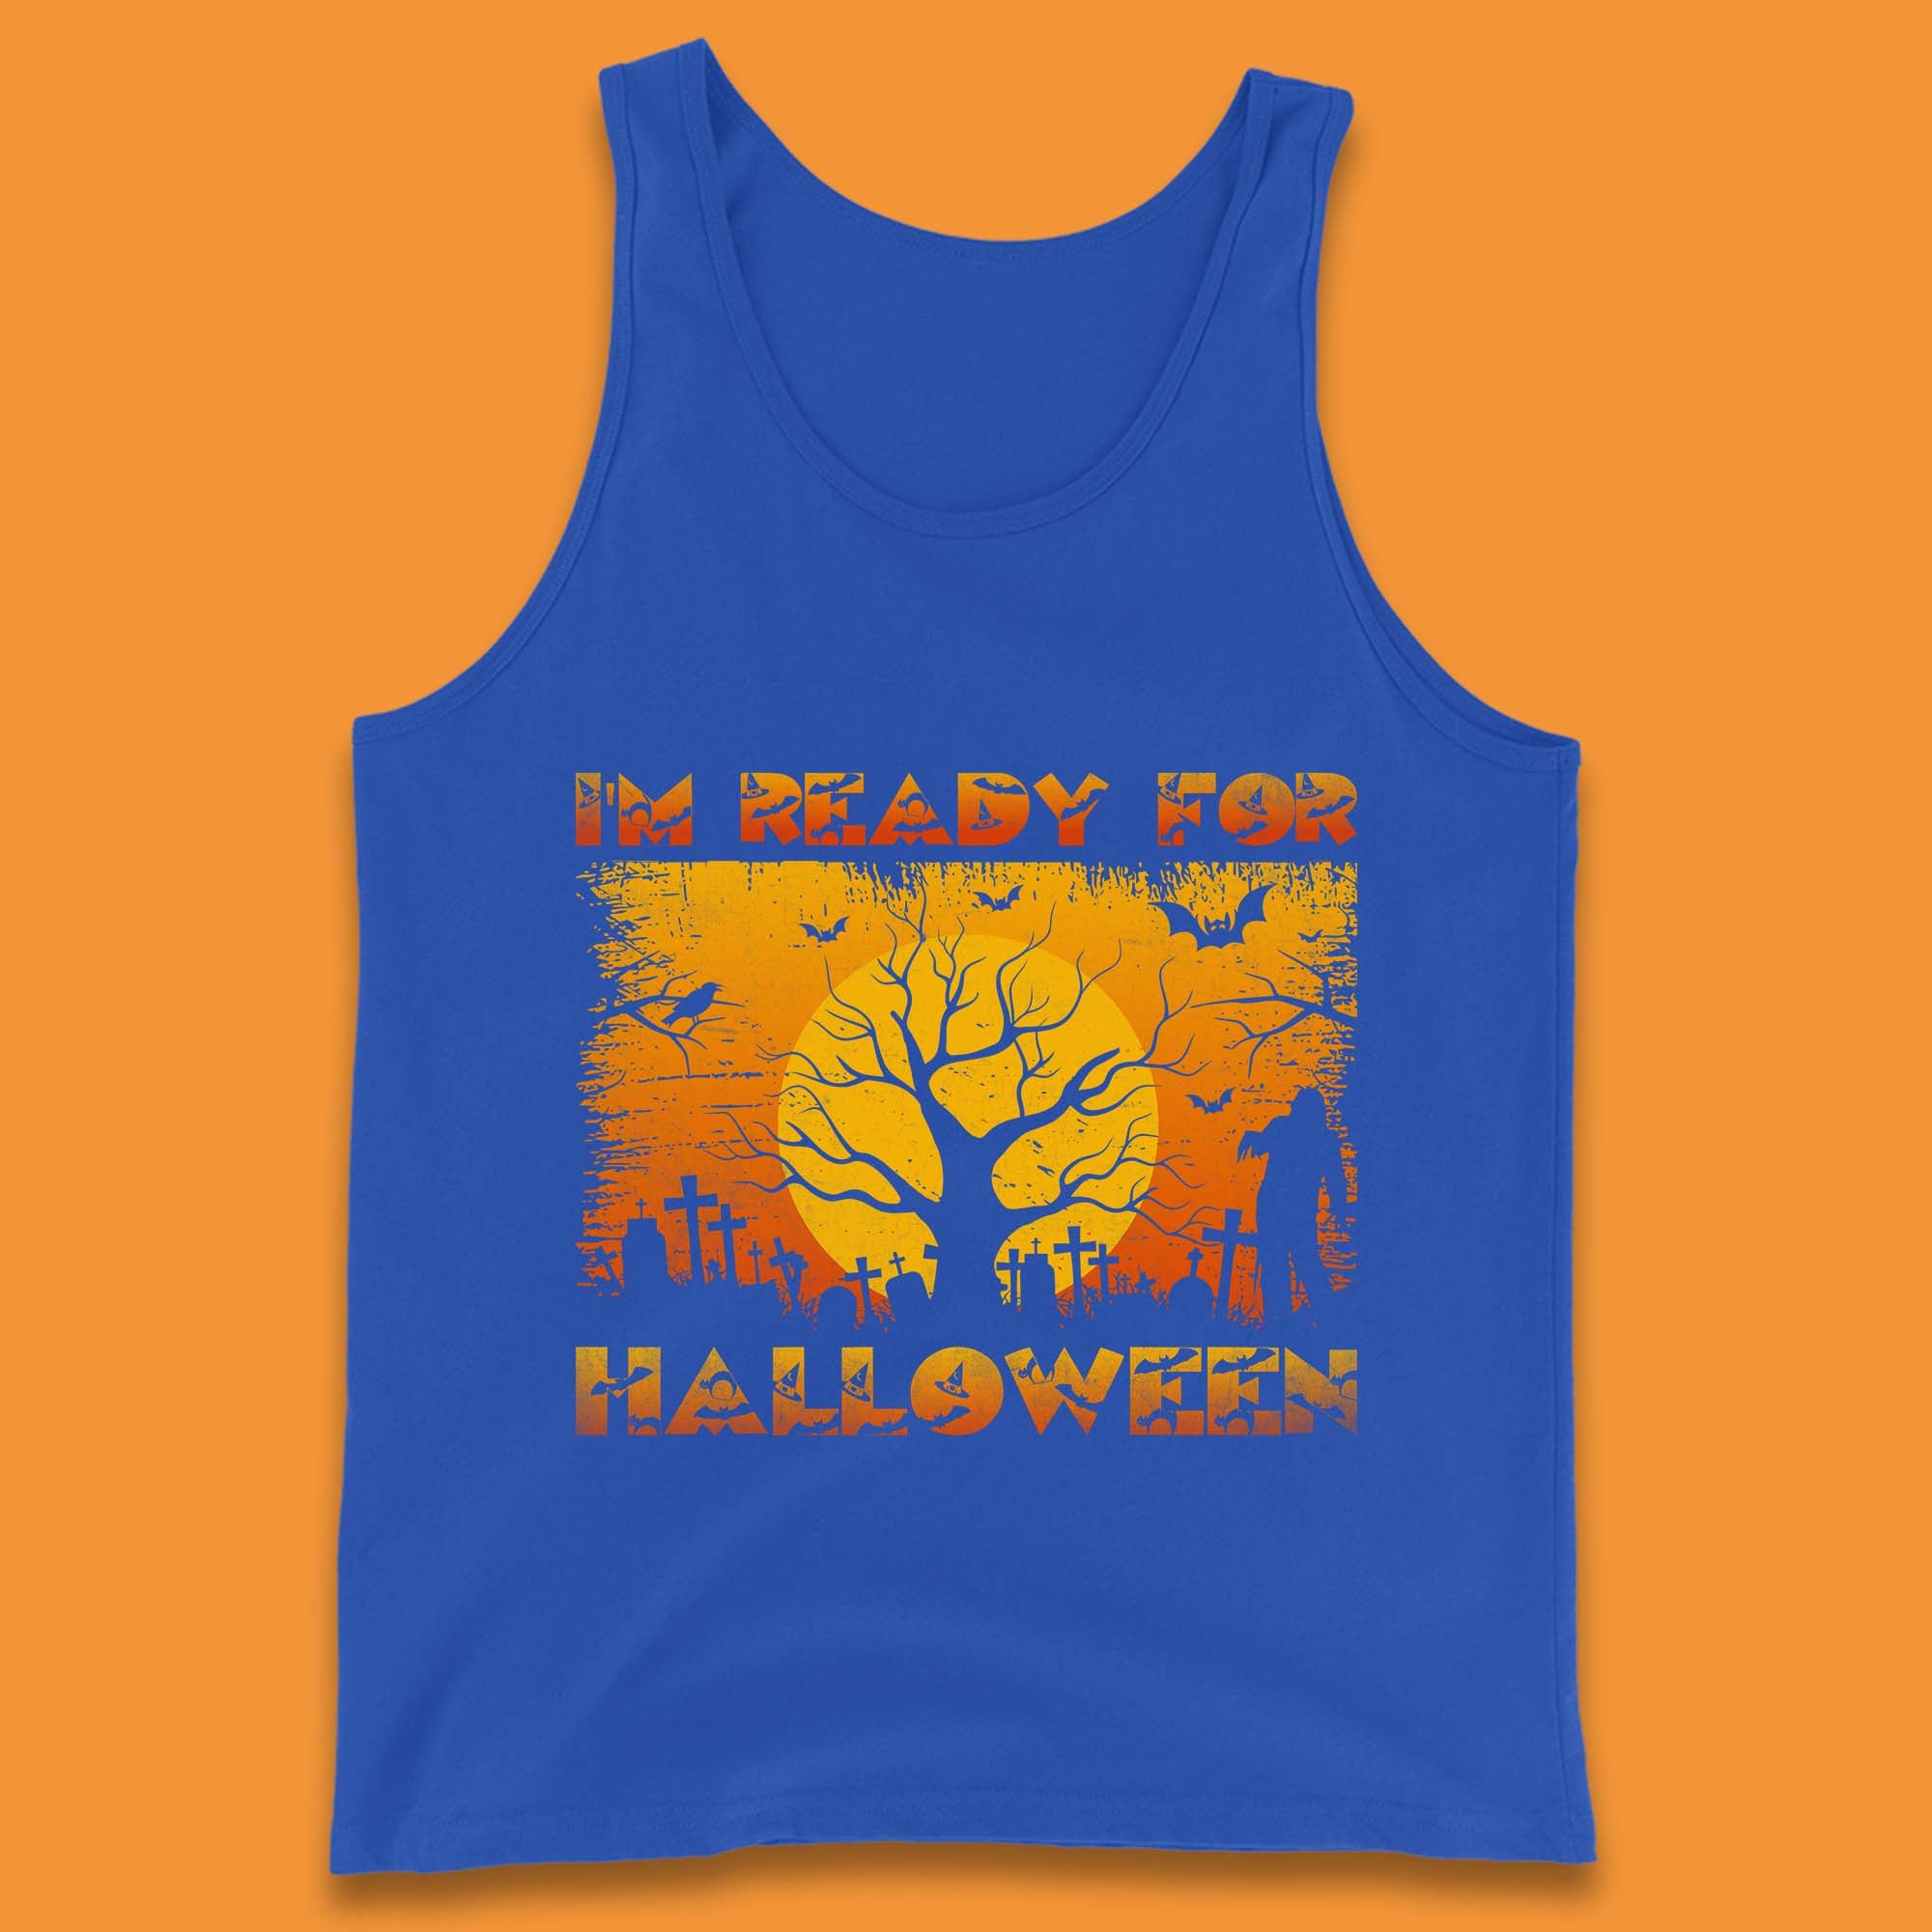 I'm Ready For Halloween Horror Scary Halloween Zombie Graveyards With Dead Tree Tank Top